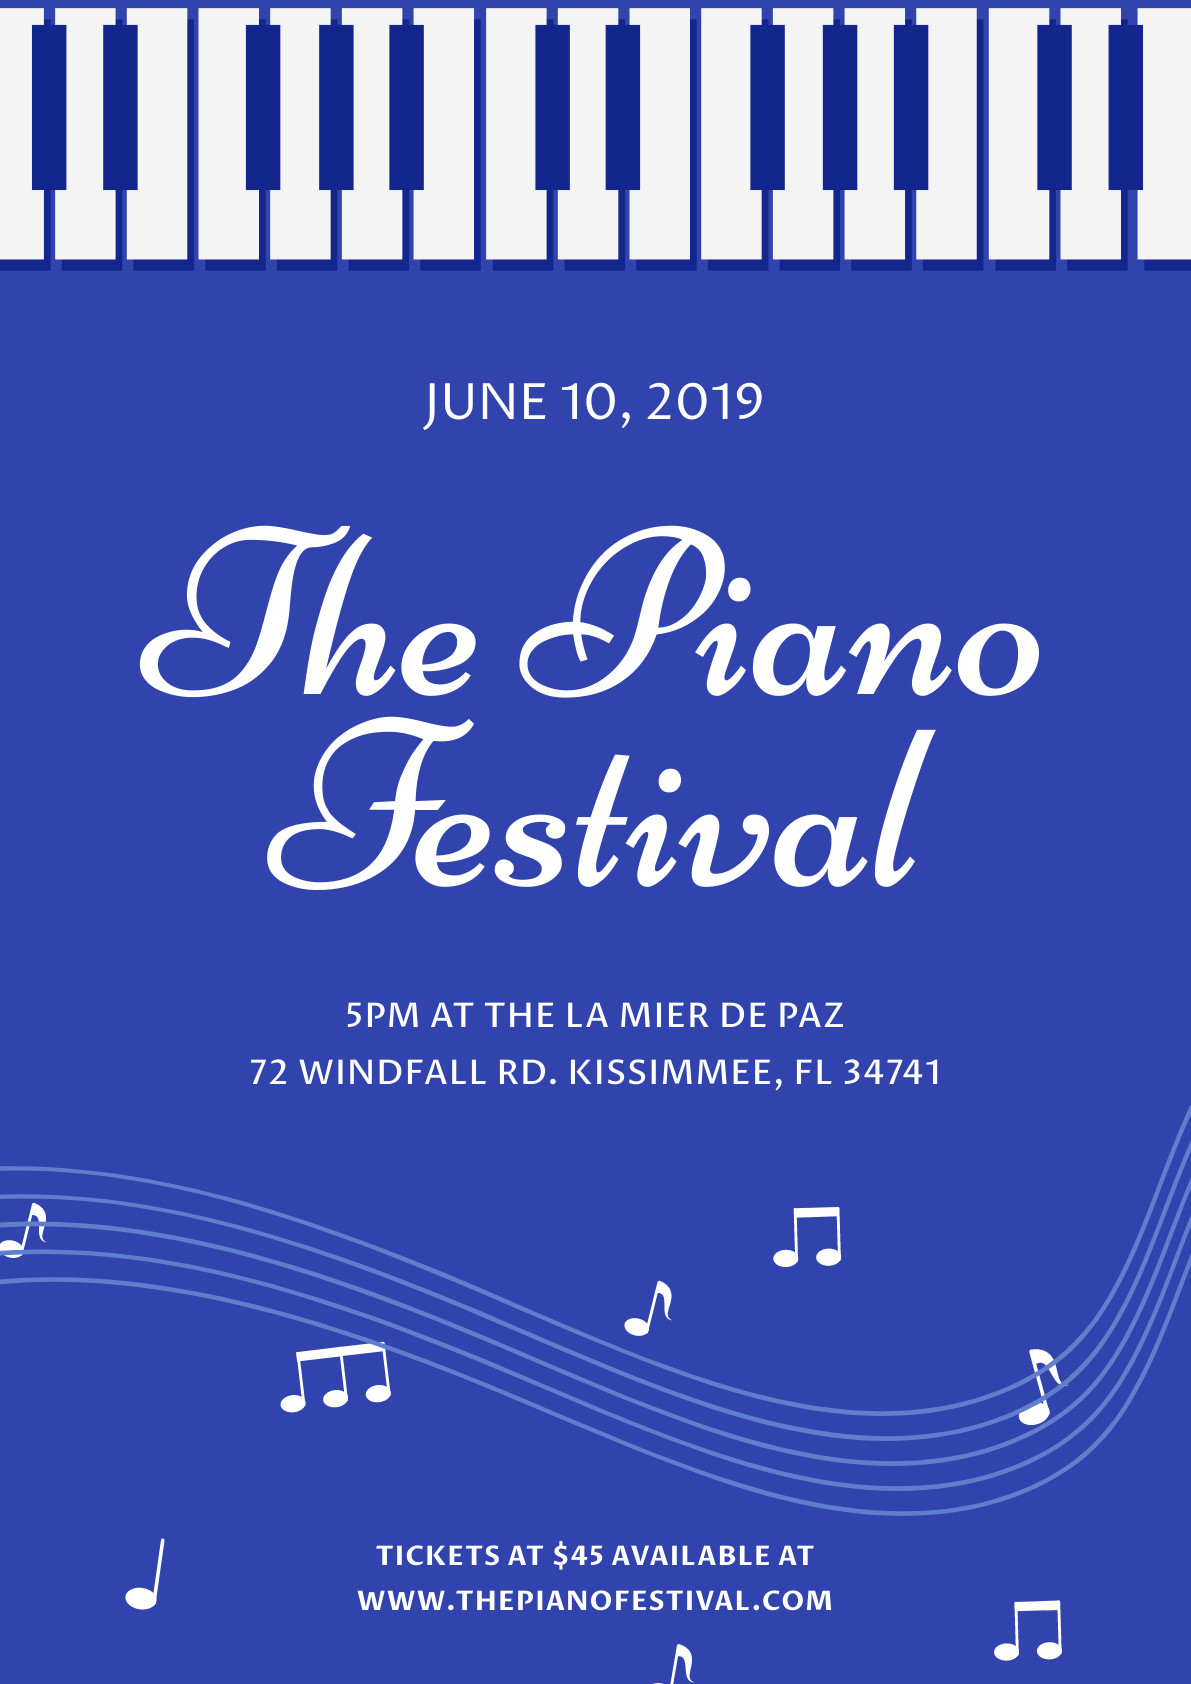 The Blue Piano Festival – Poster Template 1191x1684